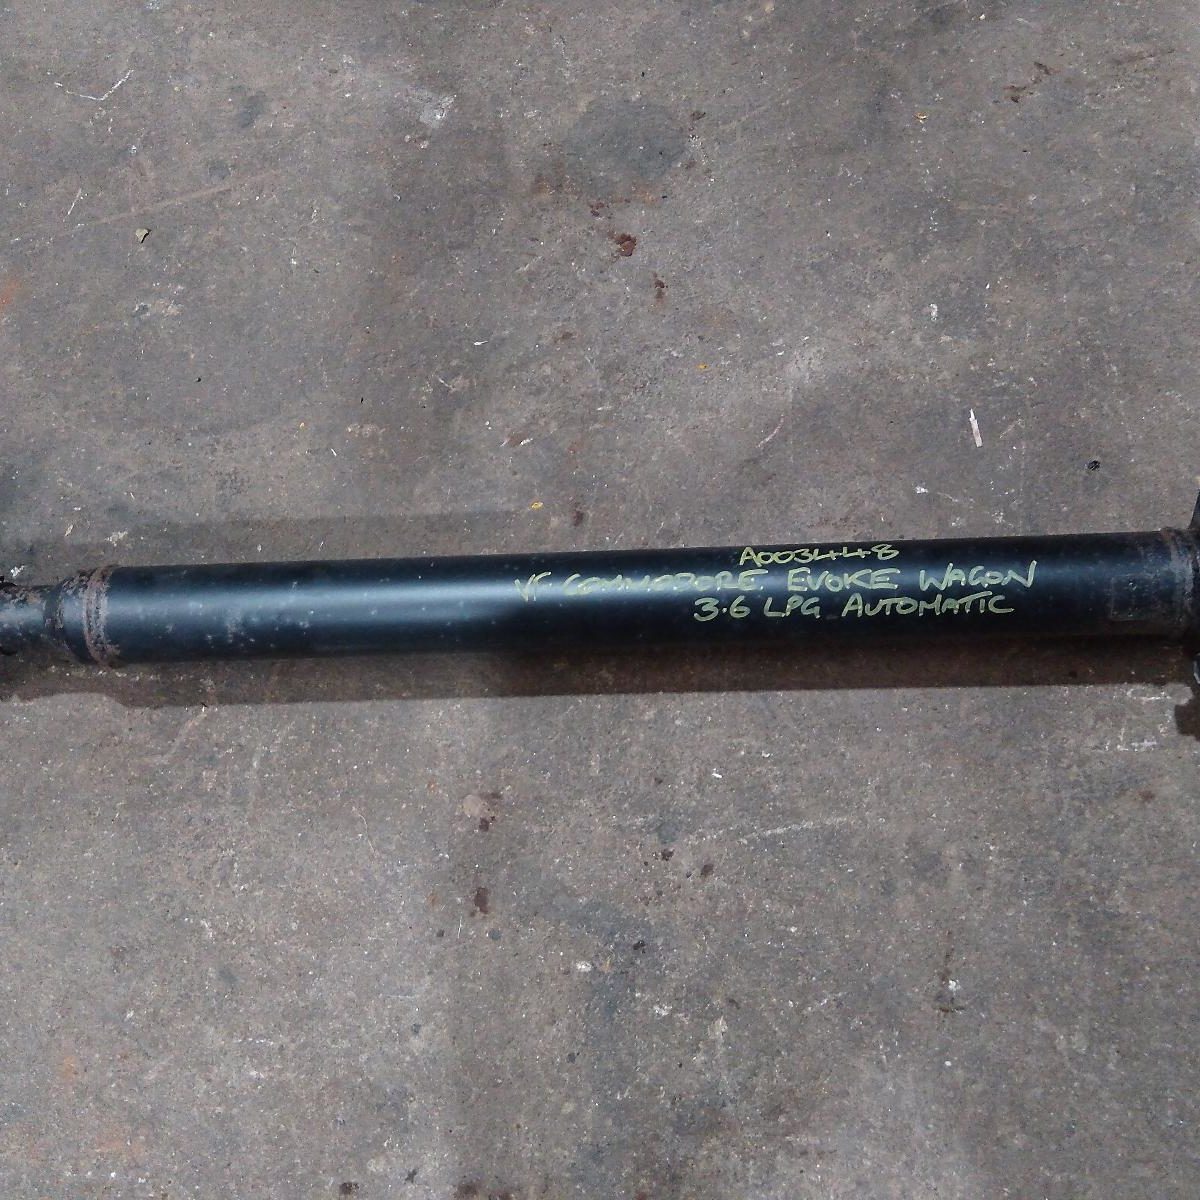 2013 HOLDEN COMMODORE REAR DRIVE SHAFT